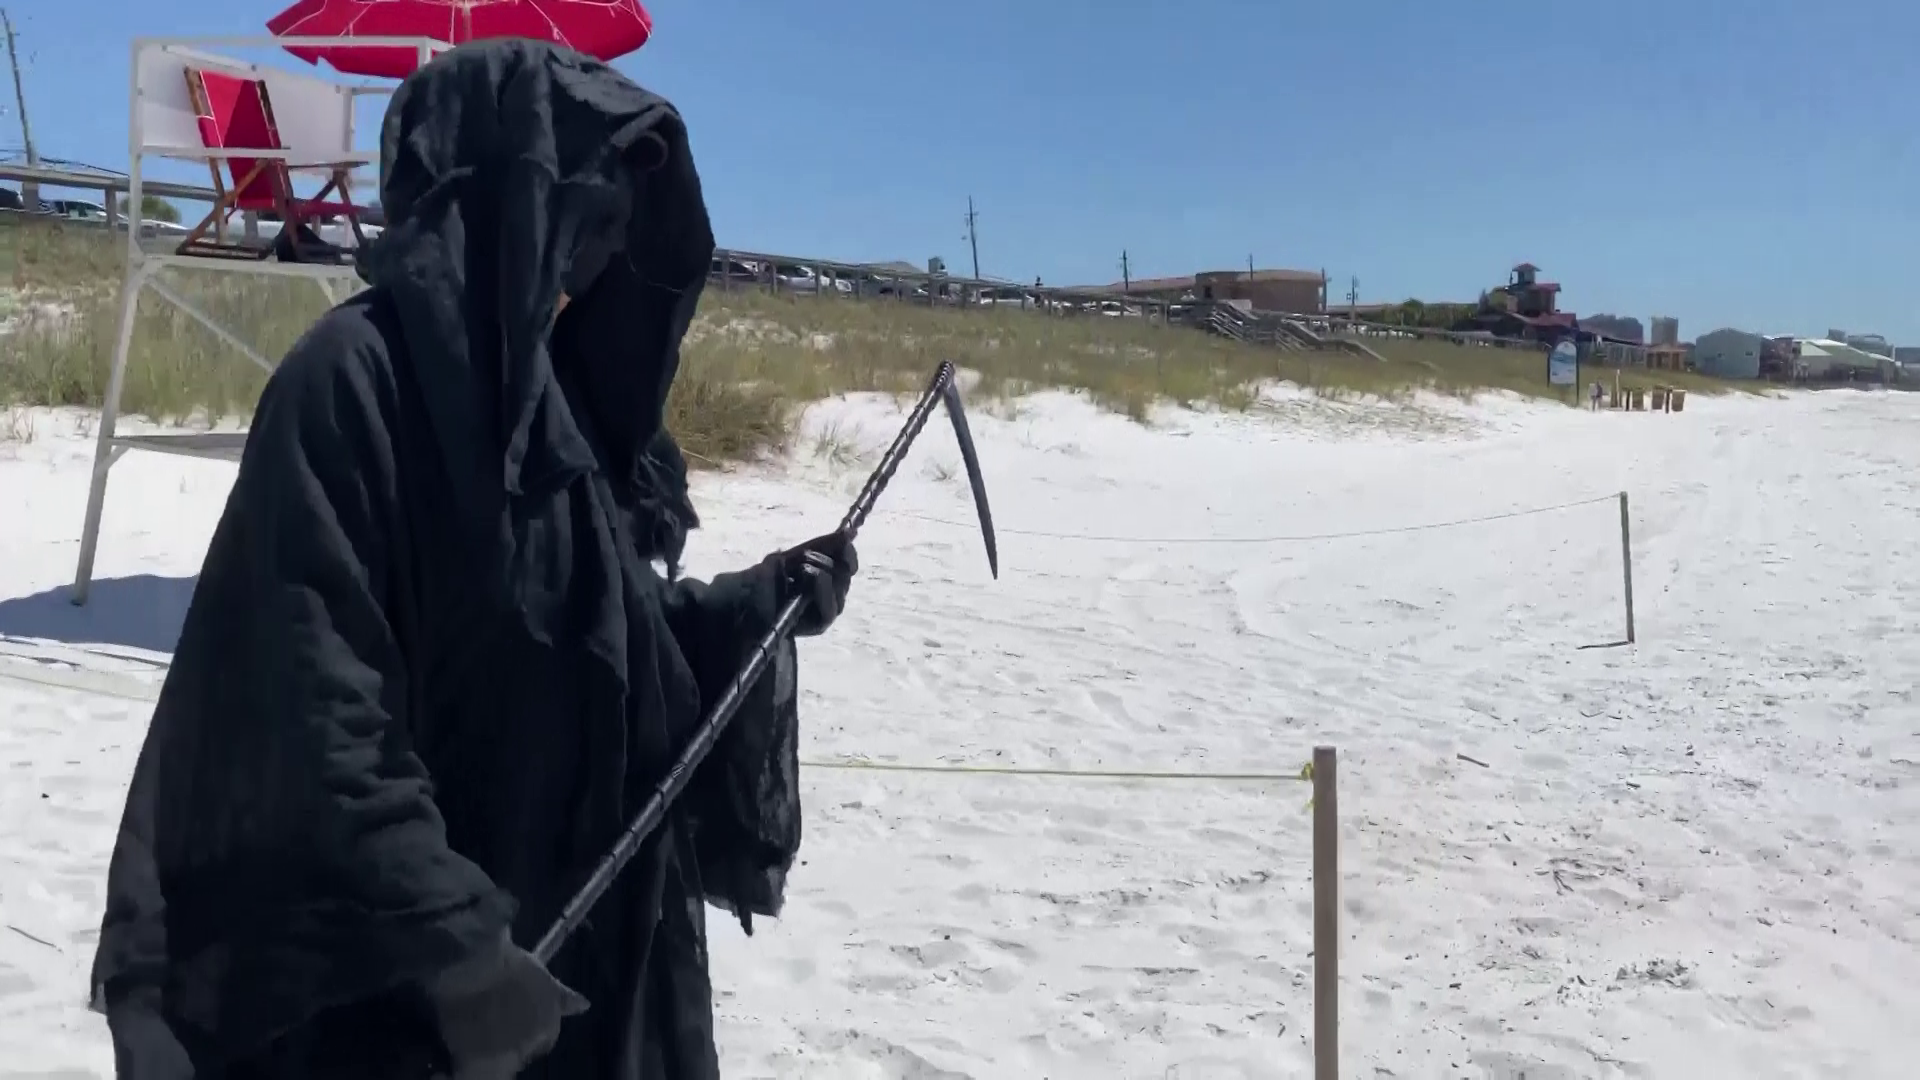 Thousands of people once again are flocking to many of Florida's beaches as they begin reopening despite the ongoing COVID-19 coronavirus pandemic.